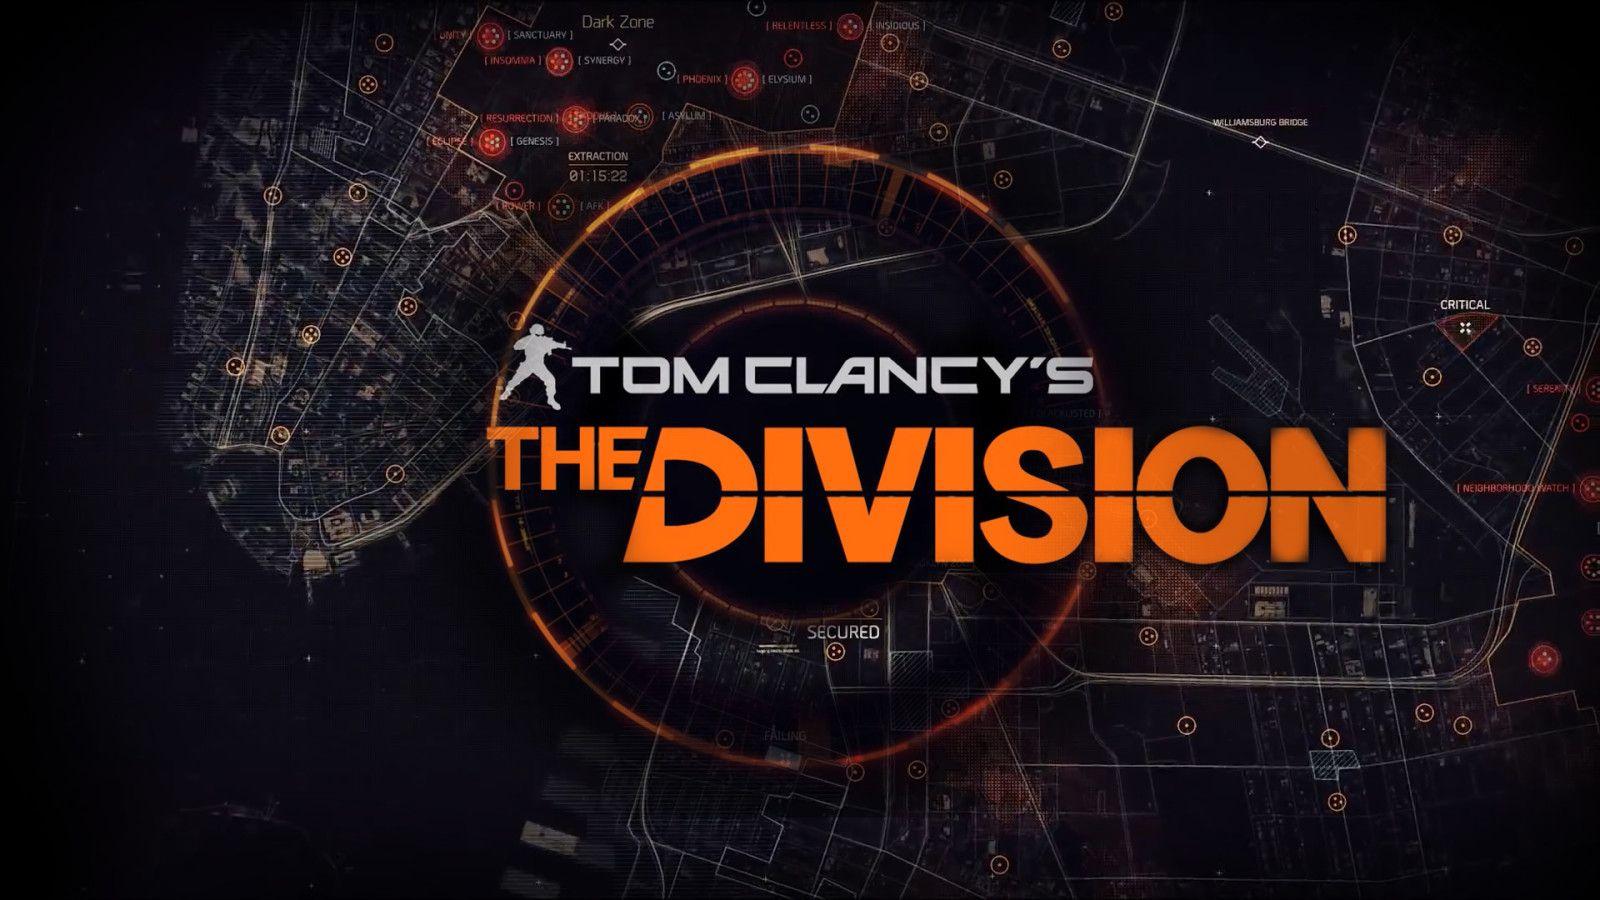 Tom clancy&;s the division